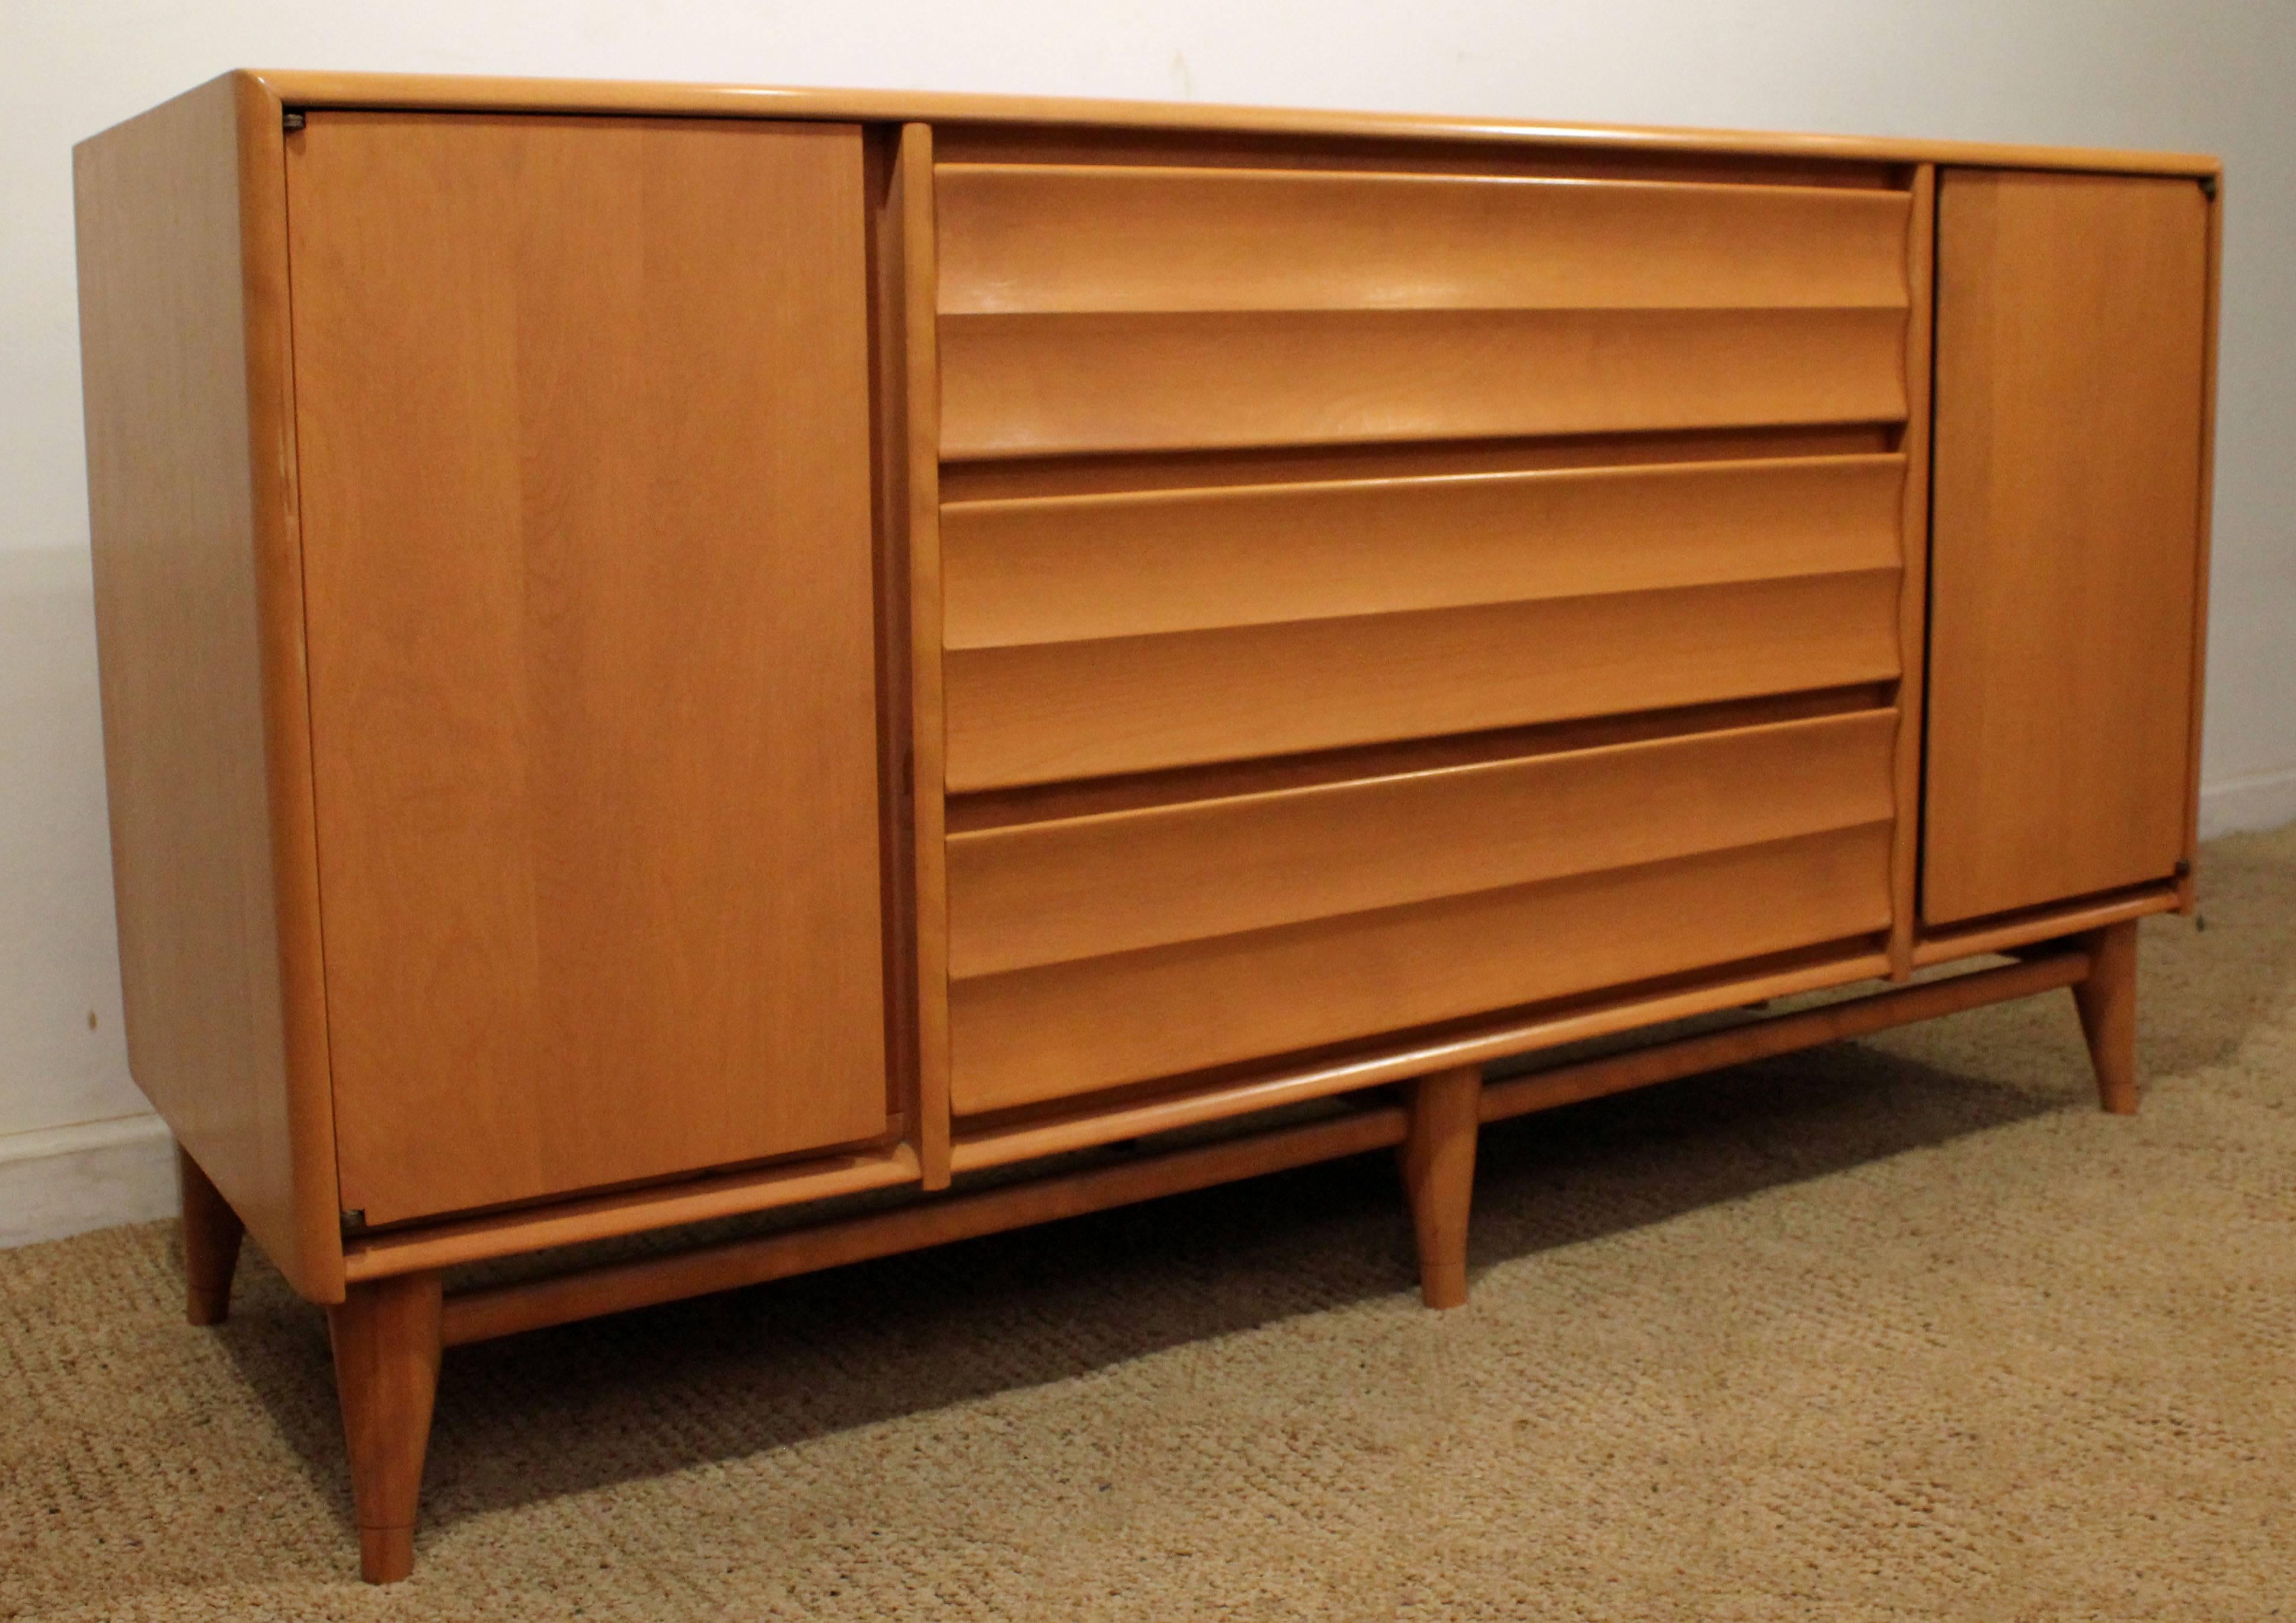 Offered is a Heywood Wakefield credenza from their 